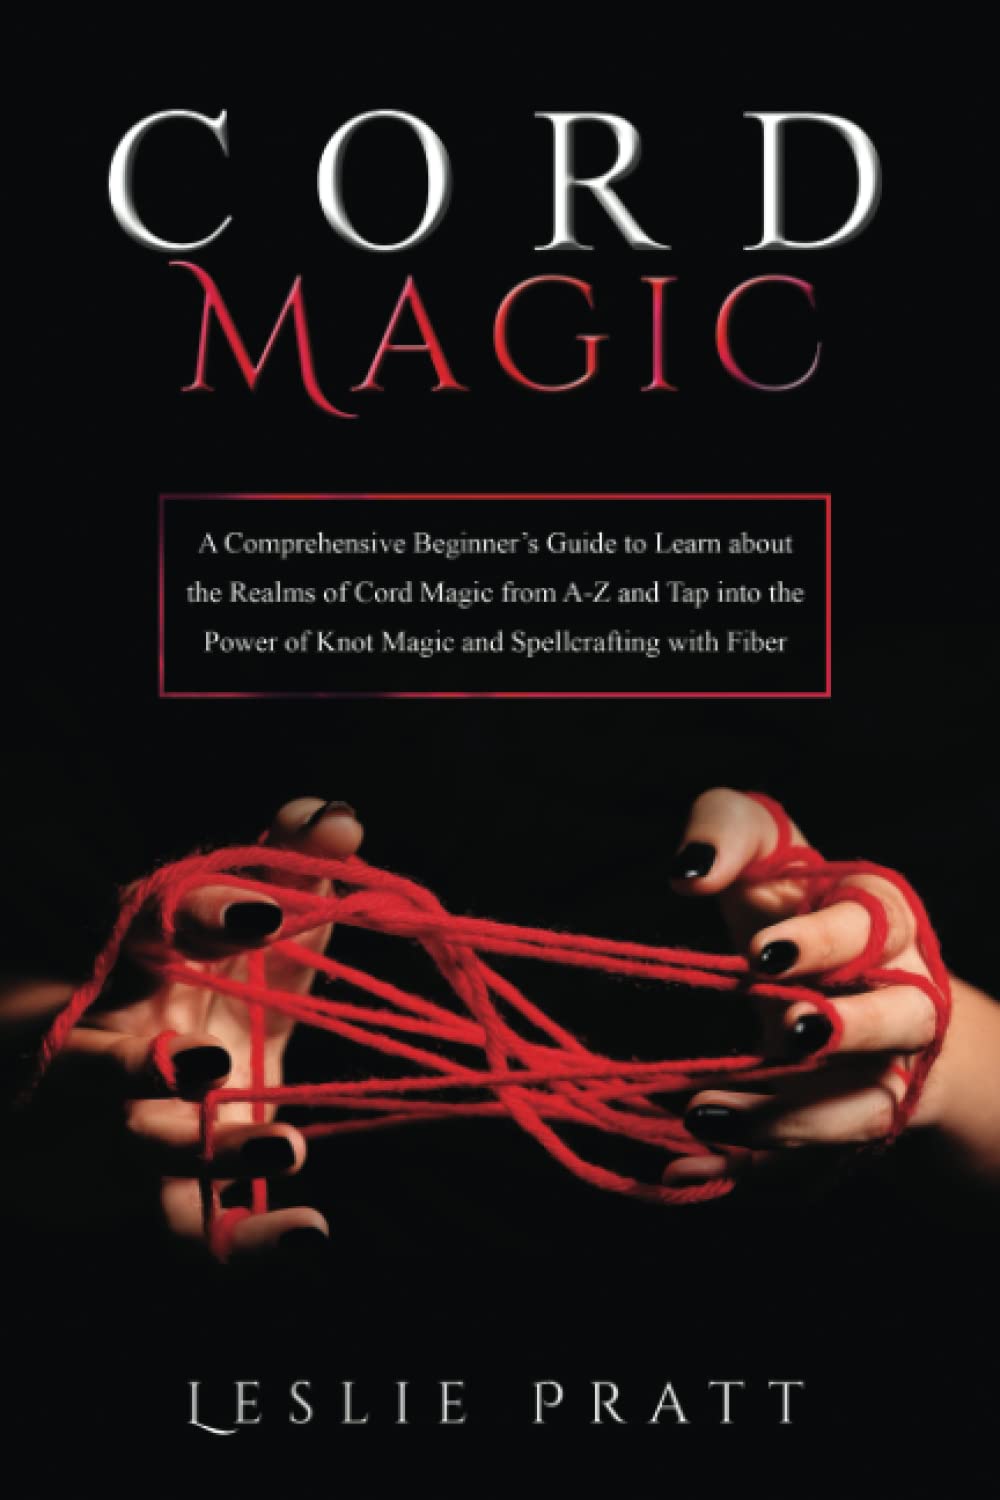 Cord Magic: A Comprehensive Beginner’s Guide to Learn about the Realms of Cord Magic from A-Z and Tap into the Power of Knot Magic and Spellcrafting with Fiber